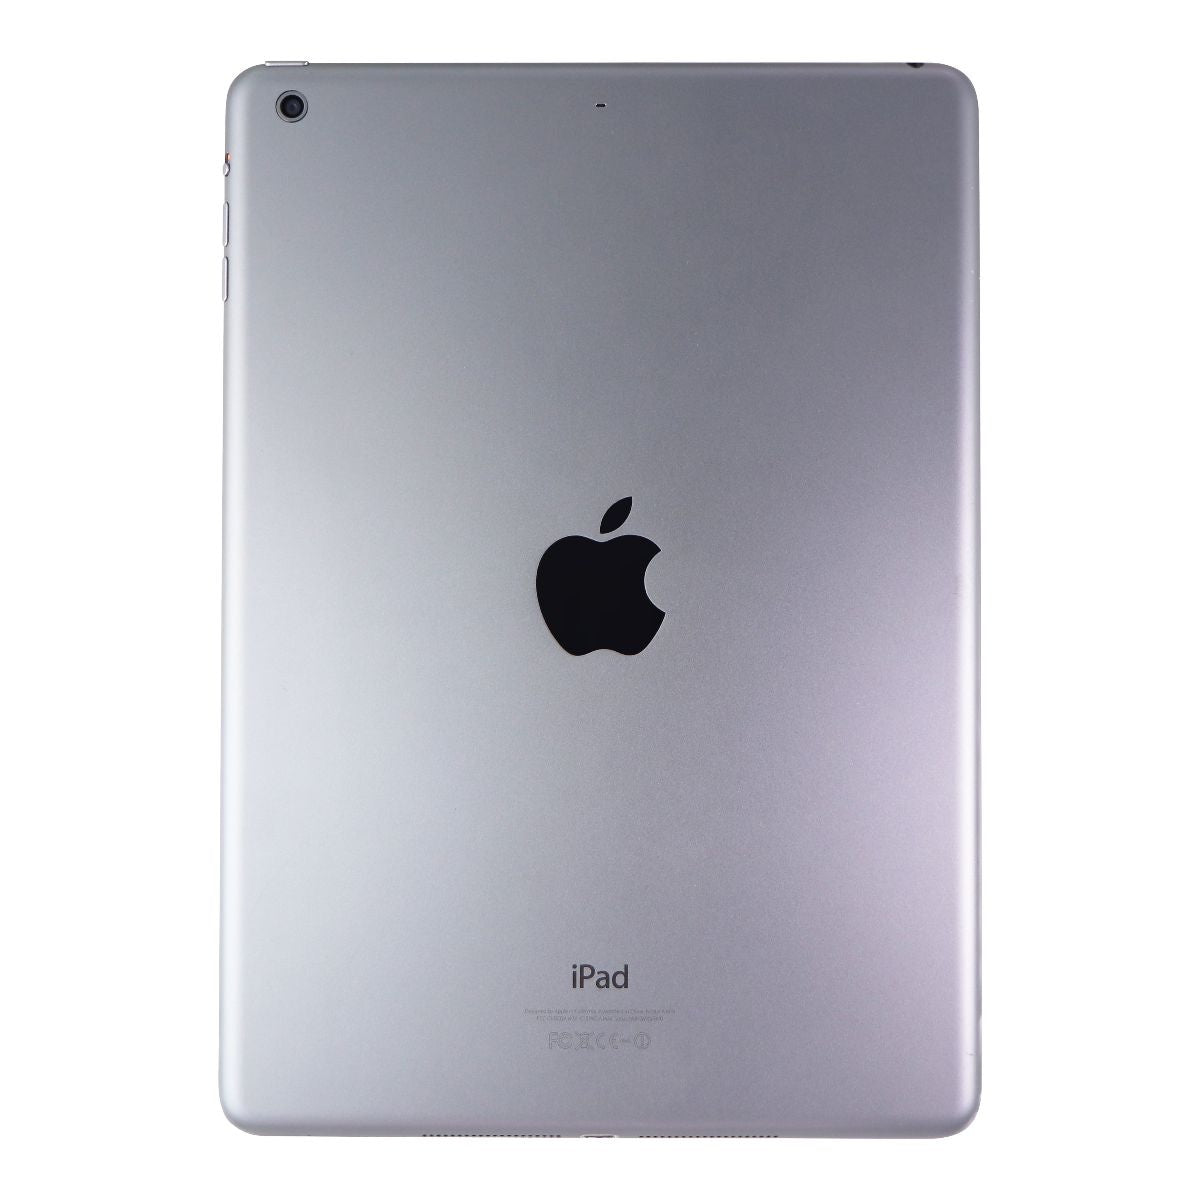 Apple iPad Air 9.7 (1st Gen) Tablet A1474 (Wi-Fi) - 16GB/Space Gray (MD785LL/A) iPads, Tablets & eBook Readers Apple    - Simple Cell Bulk Wholesale Pricing - USA Seller